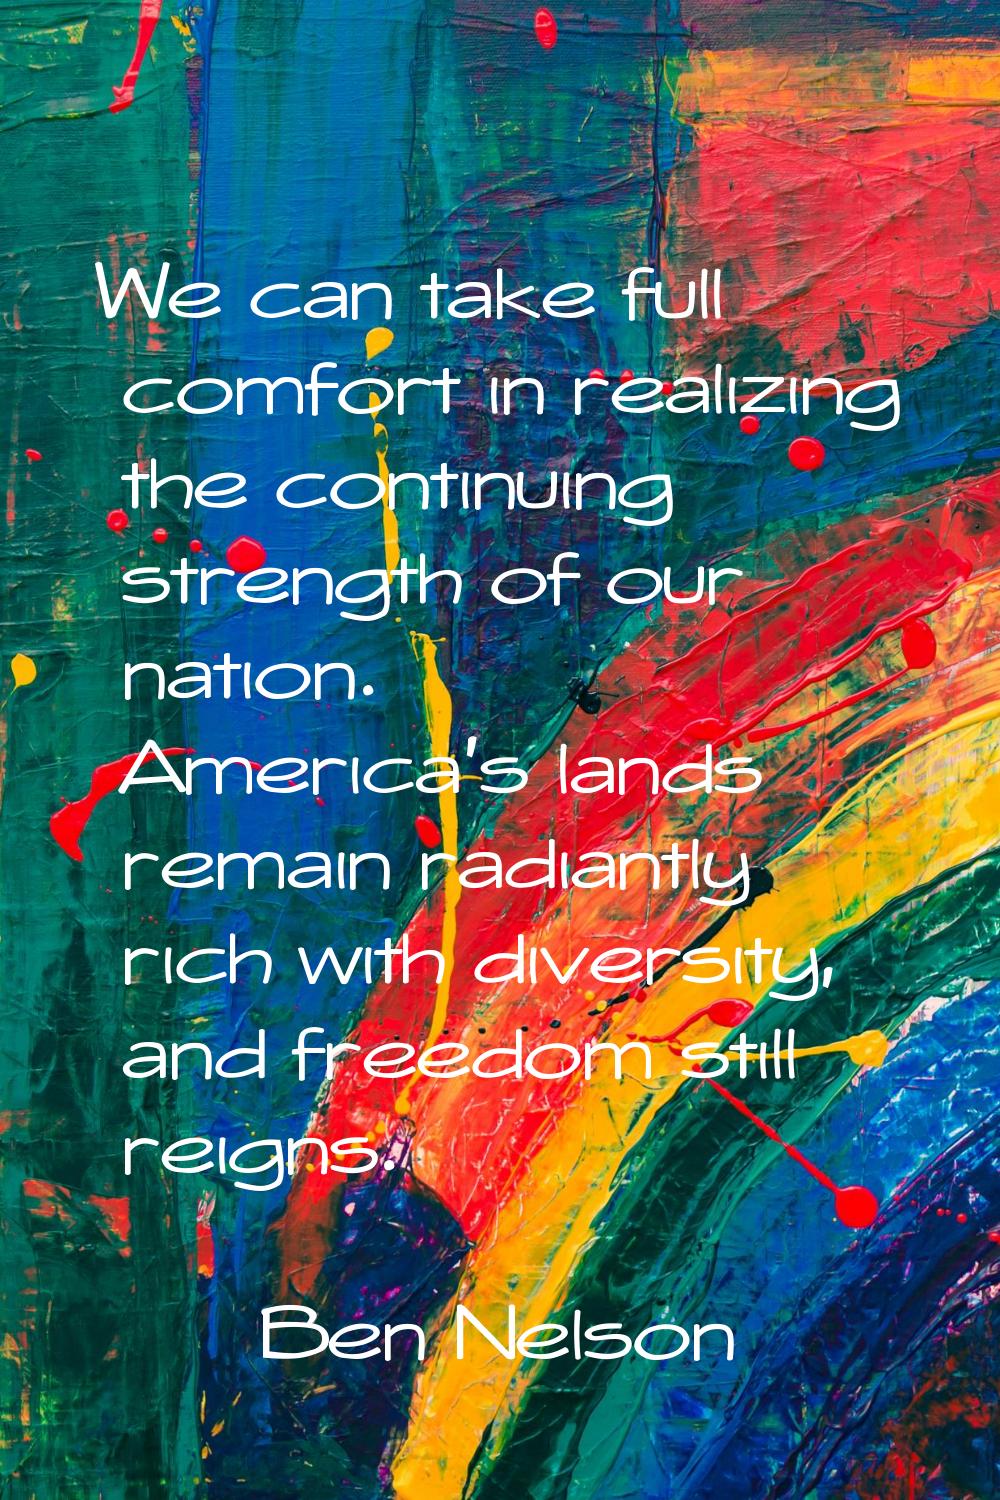 We can take full comfort in realizing the continuing strength of our nation. America's lands remain